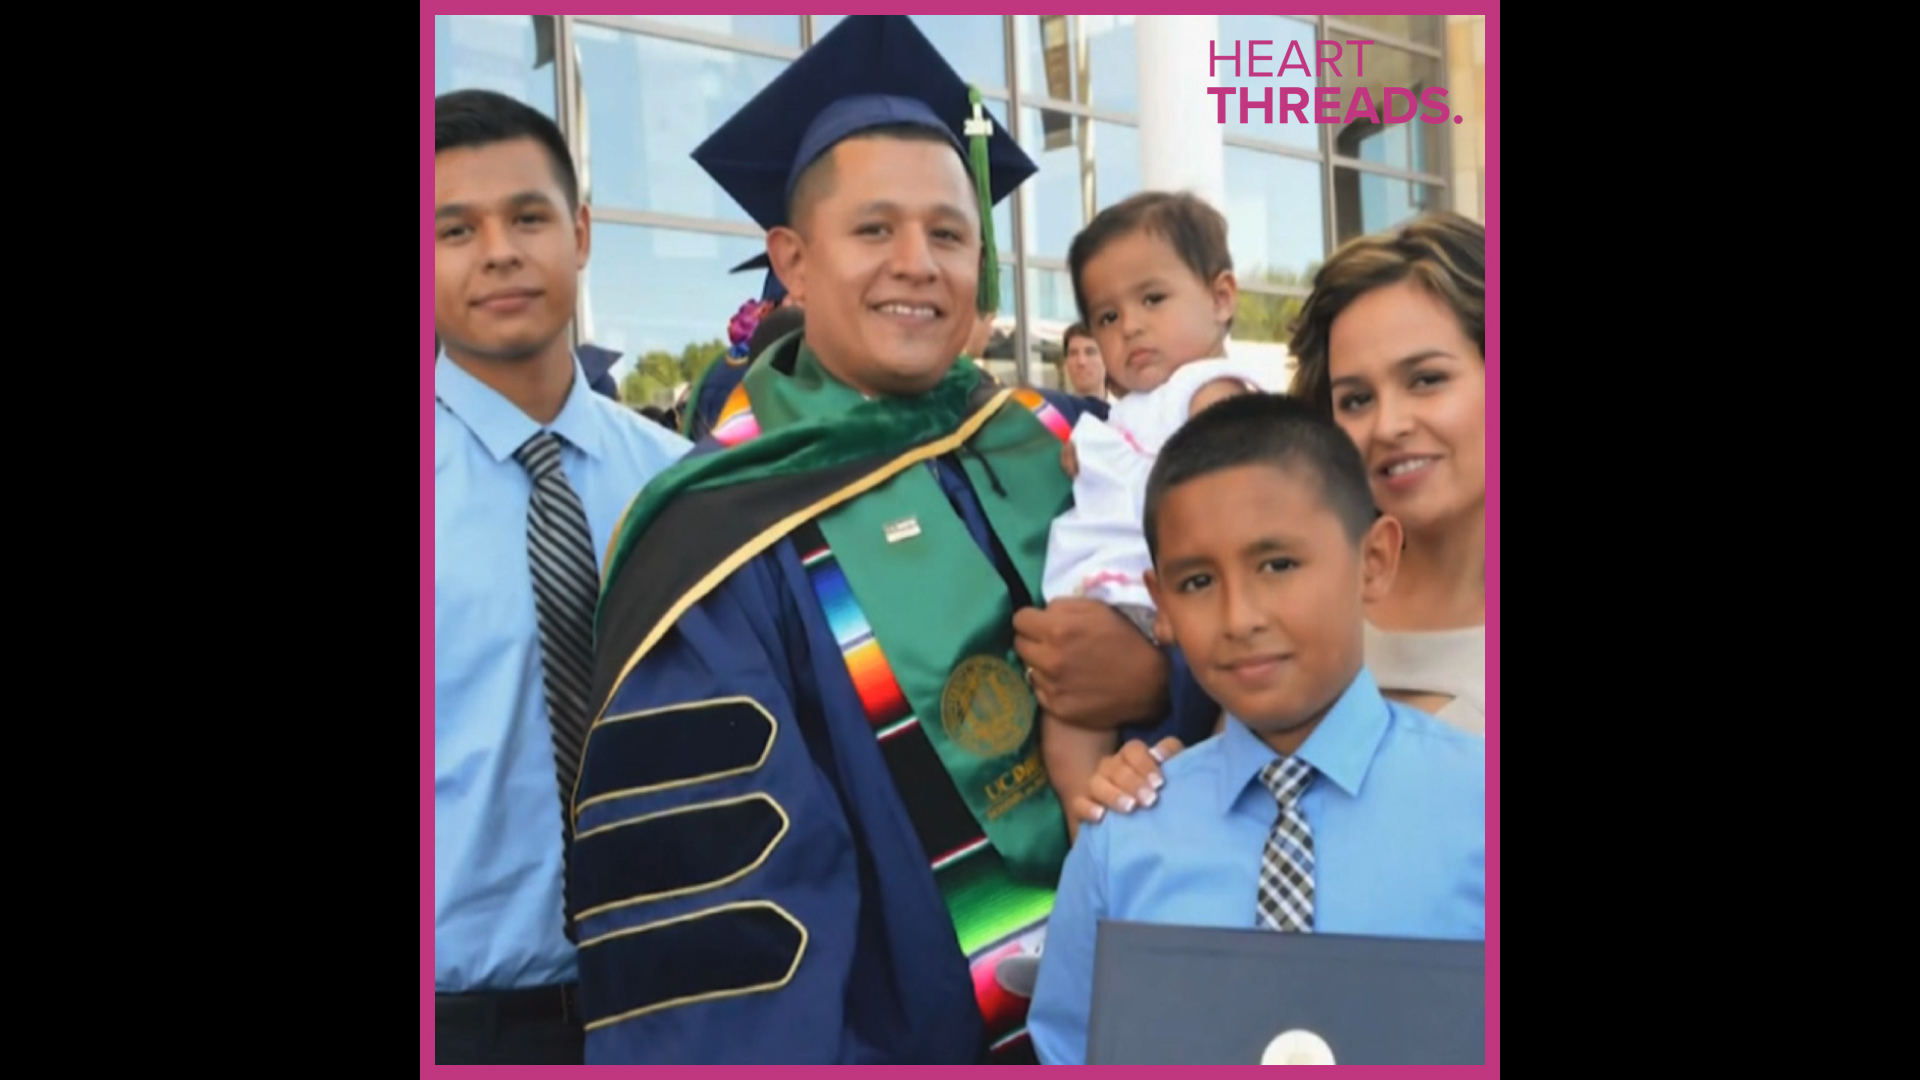 Luis Godoy fell in with the wrong crowd as a teen. But watching how hard his Mexican migrant parents worked, Luis was inspired to go back to school and become a surgeon.